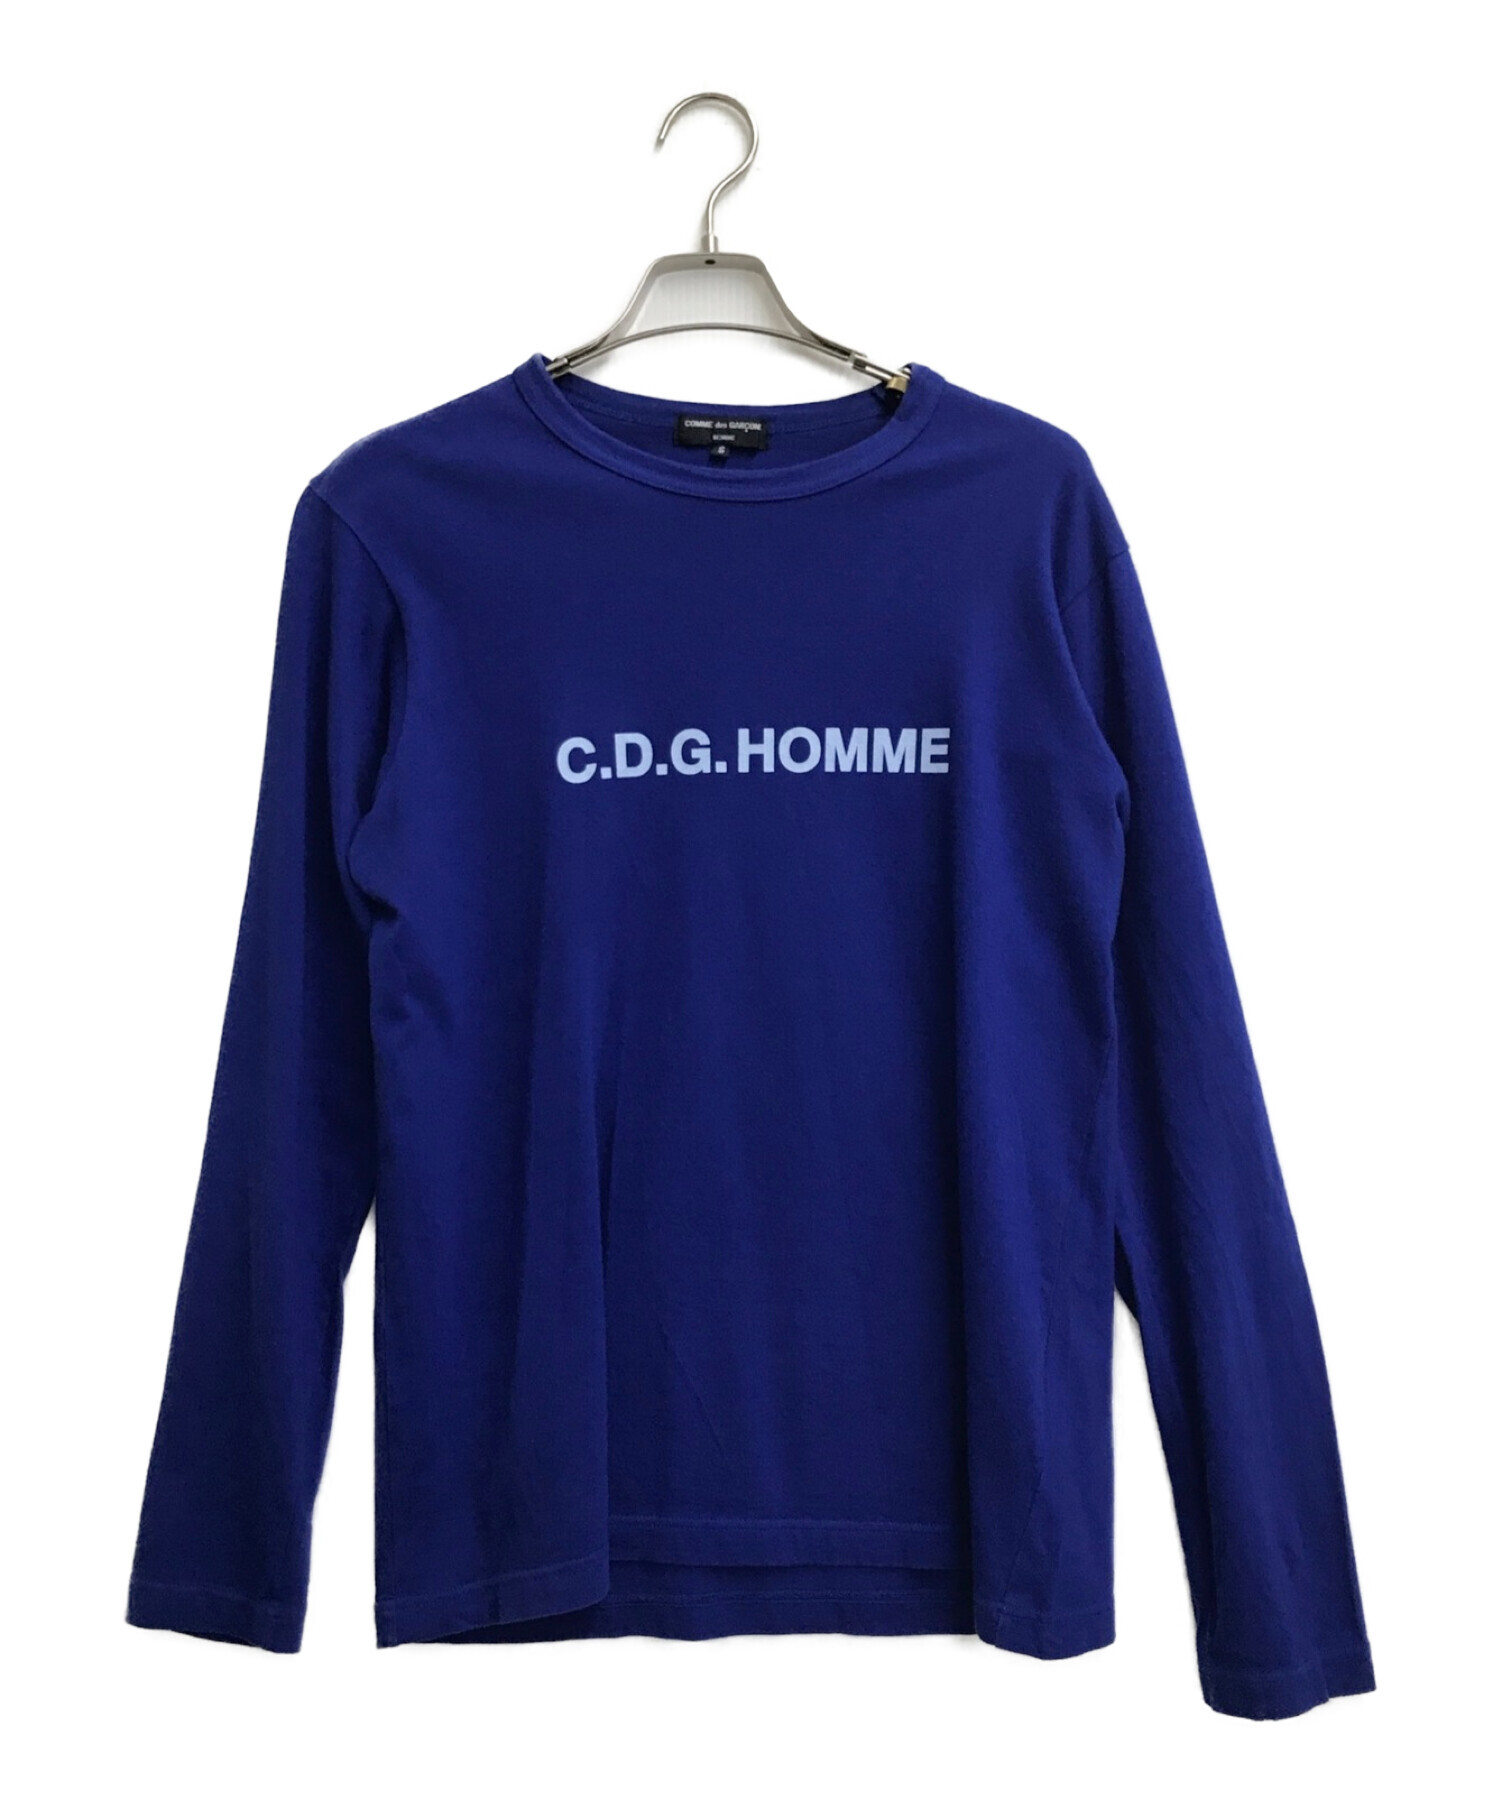 COMME des GARCONS HOMME (コムデギャルソン オム) ロゴカットソー ブルー サイズ:SIZE S